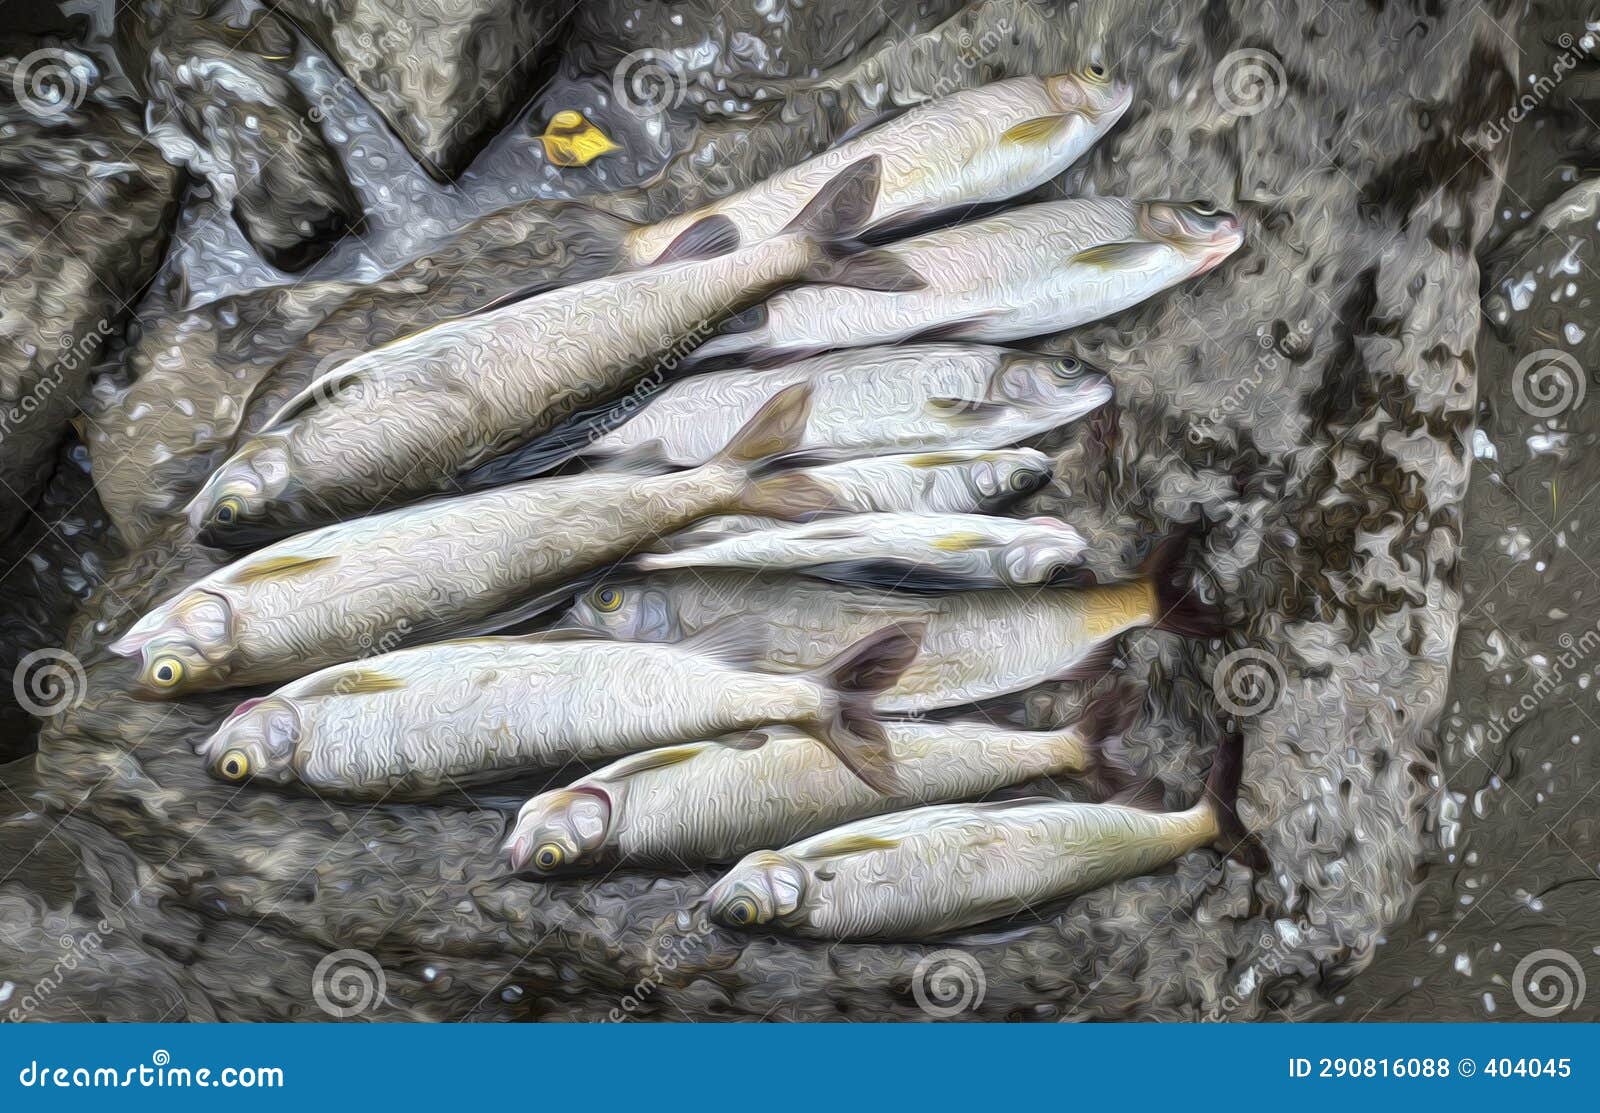 Caught Fish on a Stone with Open Mouths. Hunting, Fishing, Food